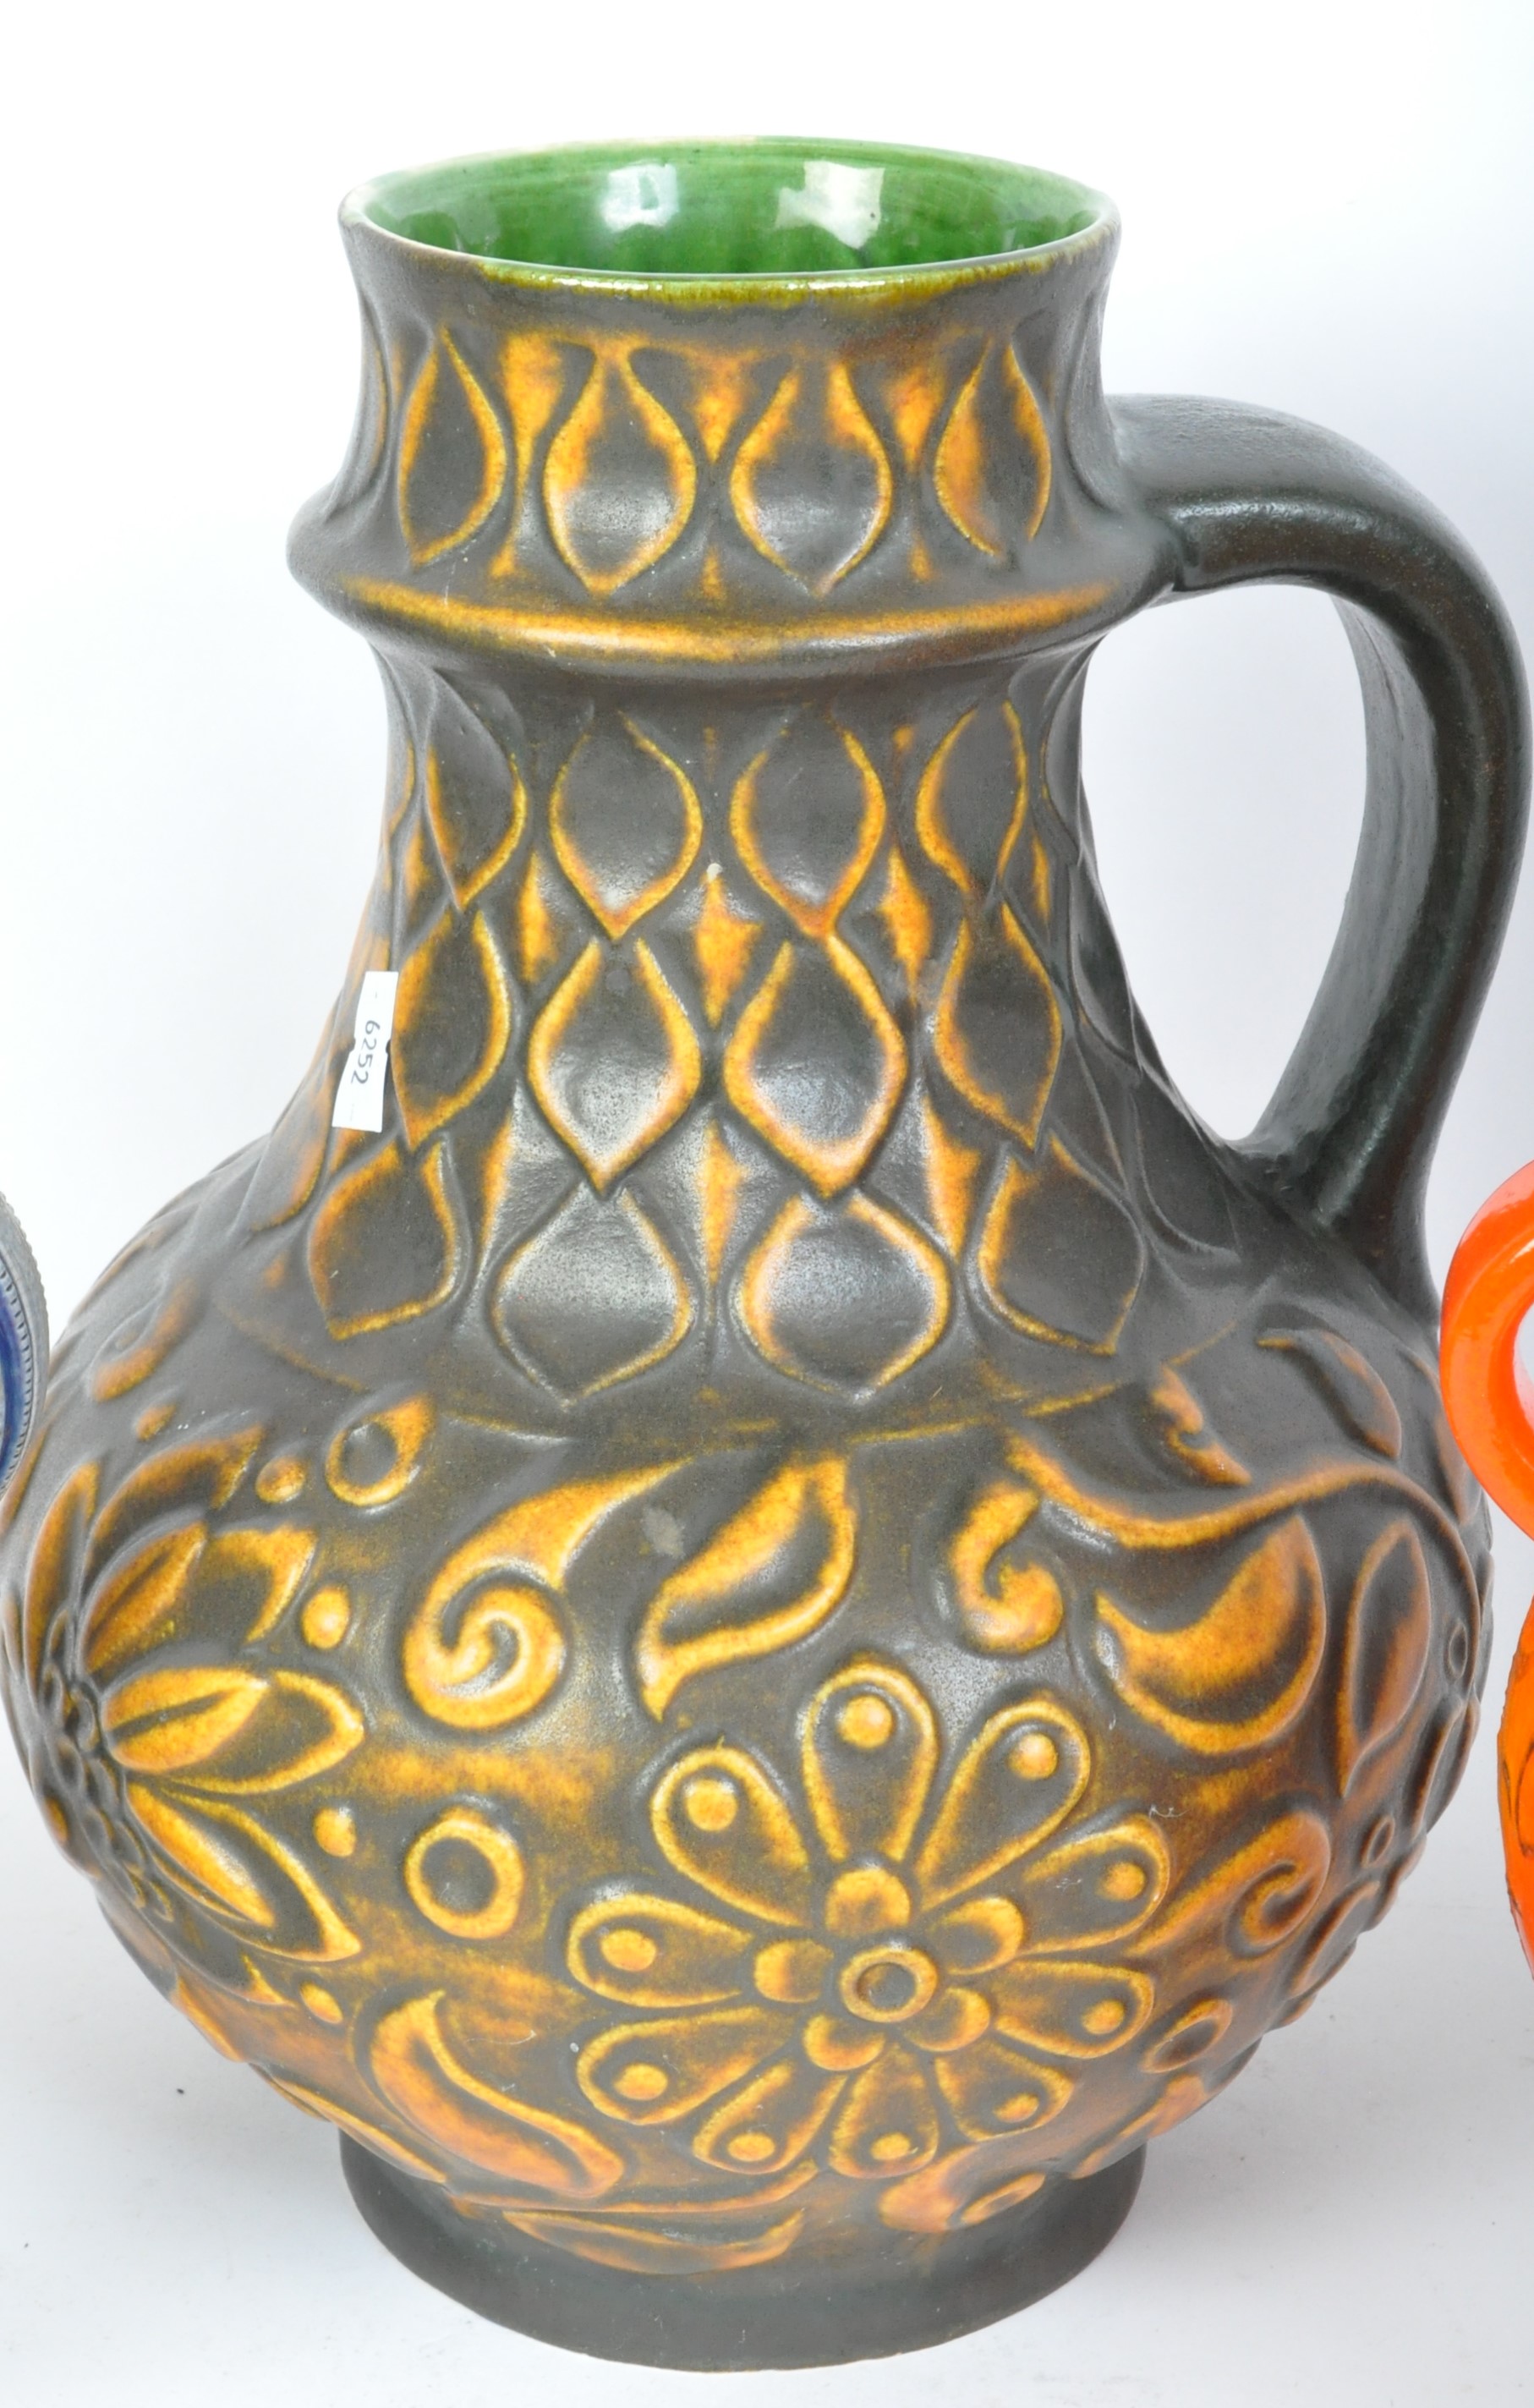 WEST GERMAN POTTERY VASES CIRCA 1960S - Image 3 of 5